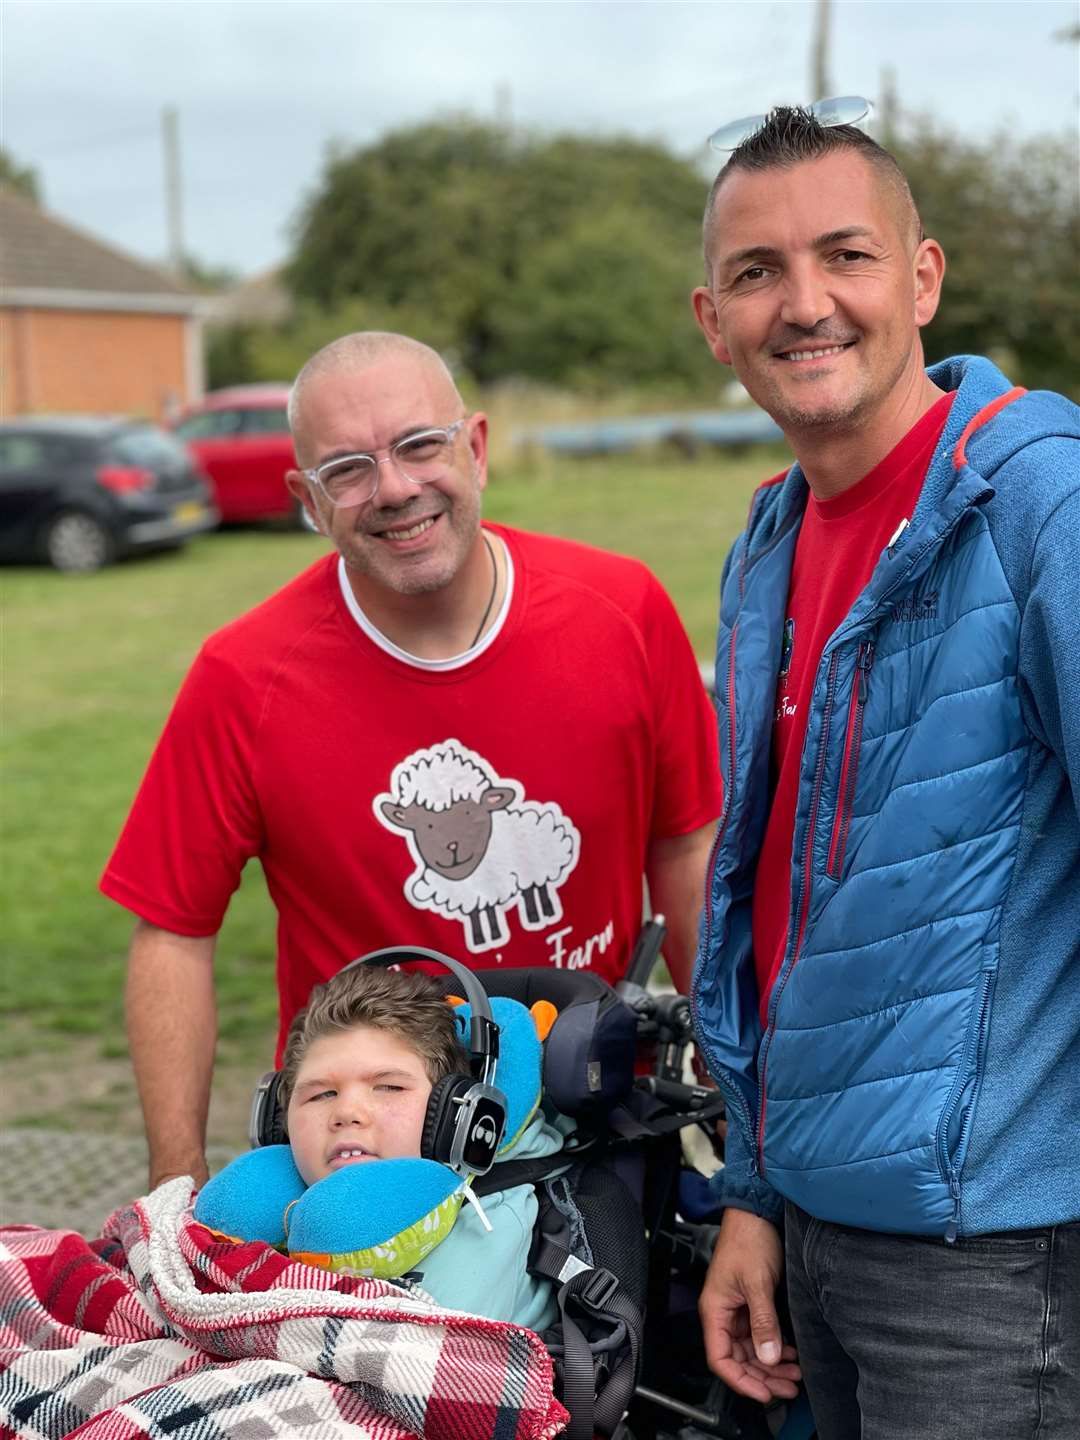 Dads Garry, left, and Kyle Ratcliffe celebrate the third anniversary of Curly's Farm at Bayview, Sheppey, with their son 'Curly' Curtis